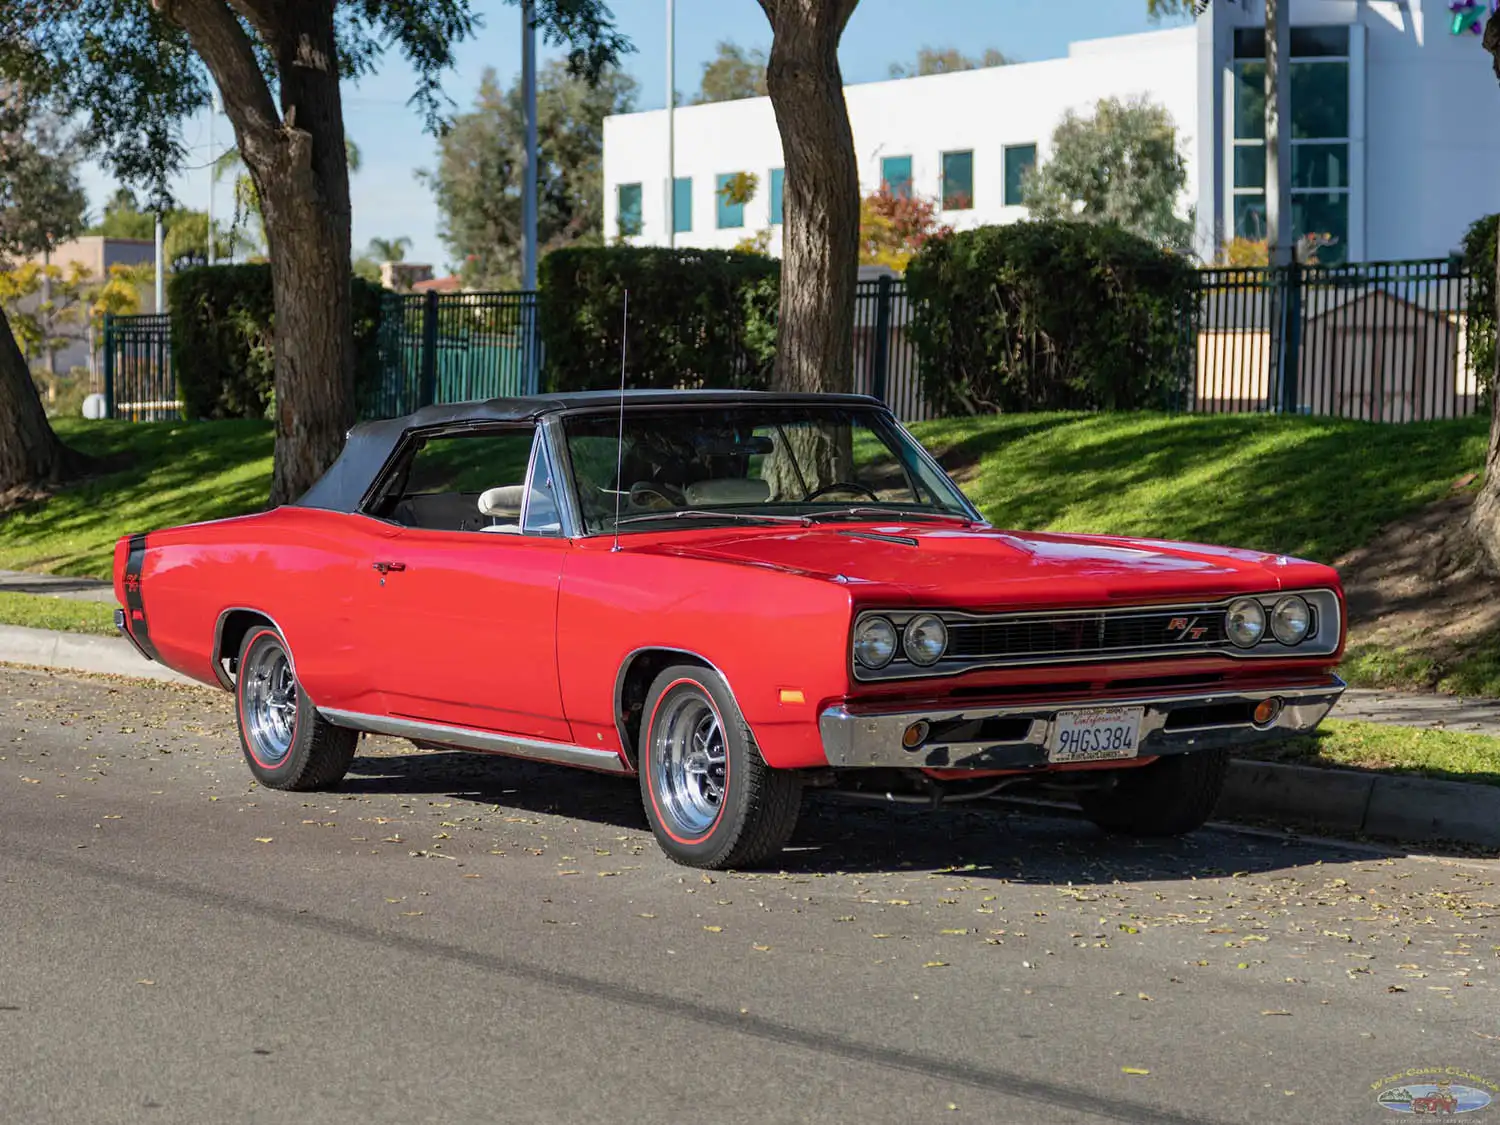 1969 Dodge Coronet R/T Convertible – A Classic Muscle Car Masterpiece by West Coast Classics